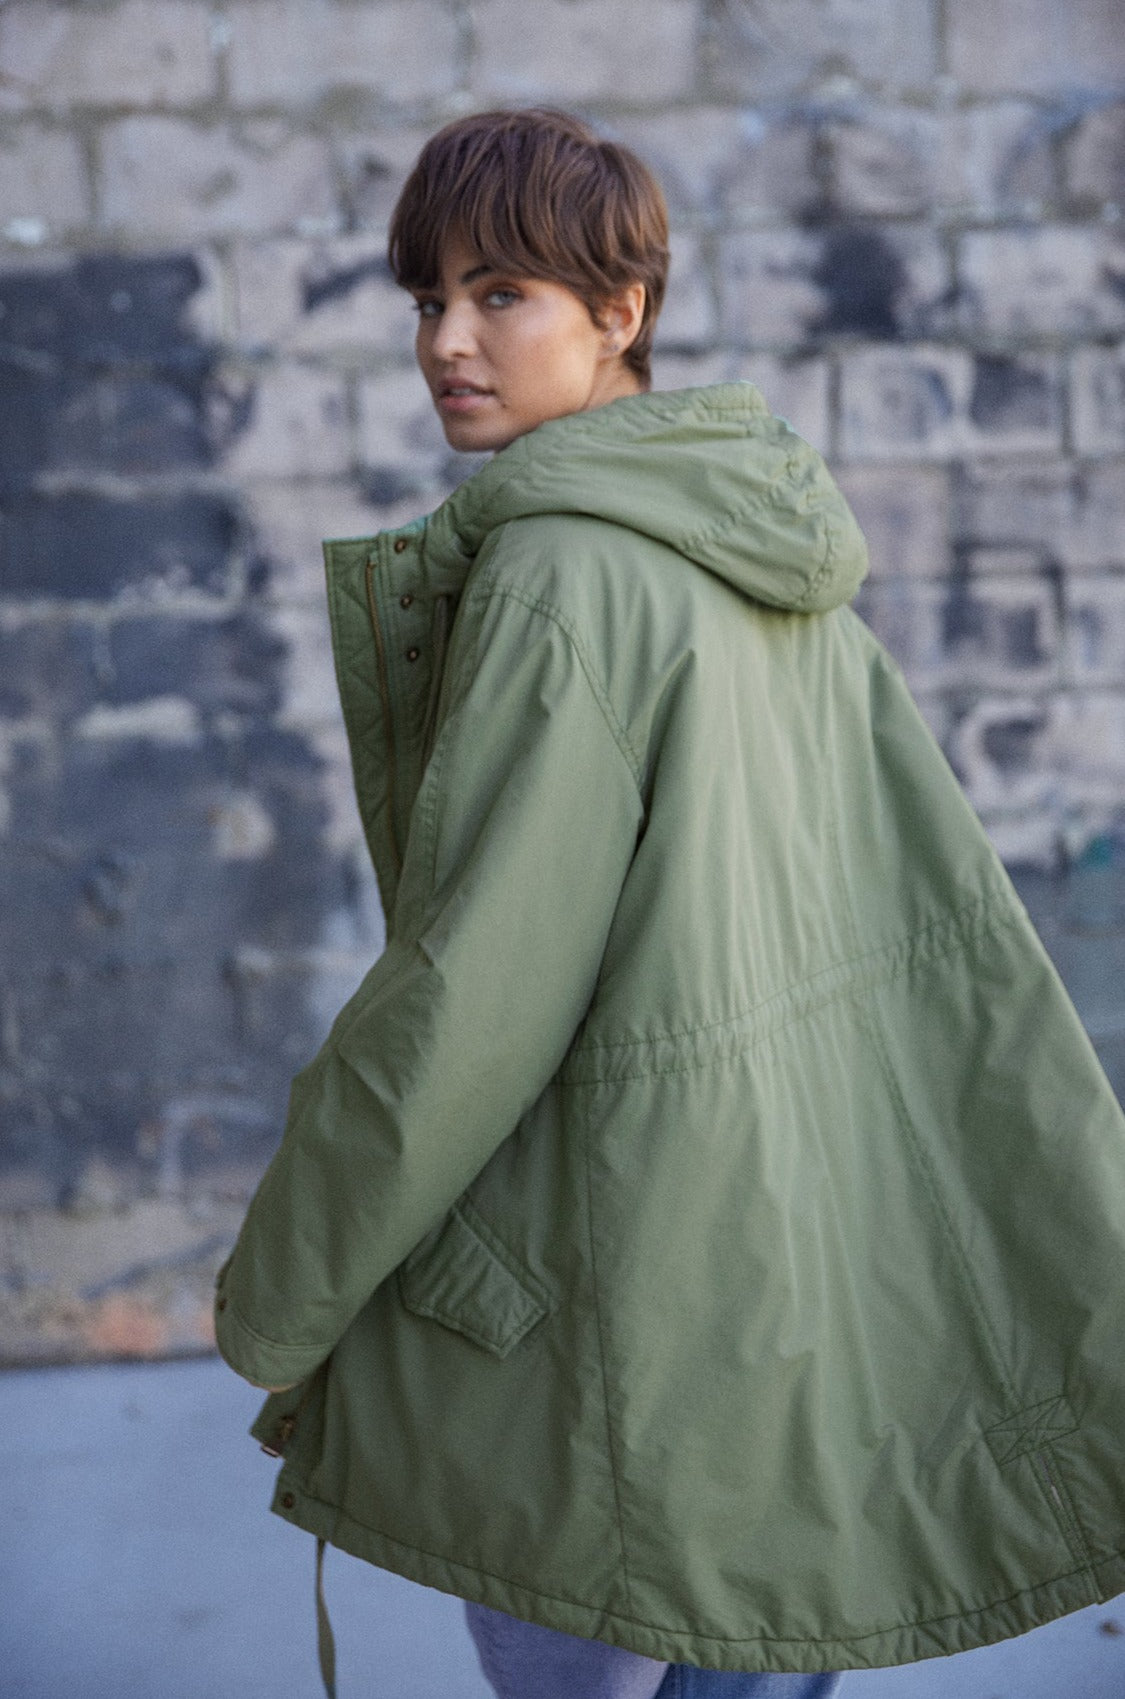 Cheviot Jacket in evergreen side & back-25315857203393